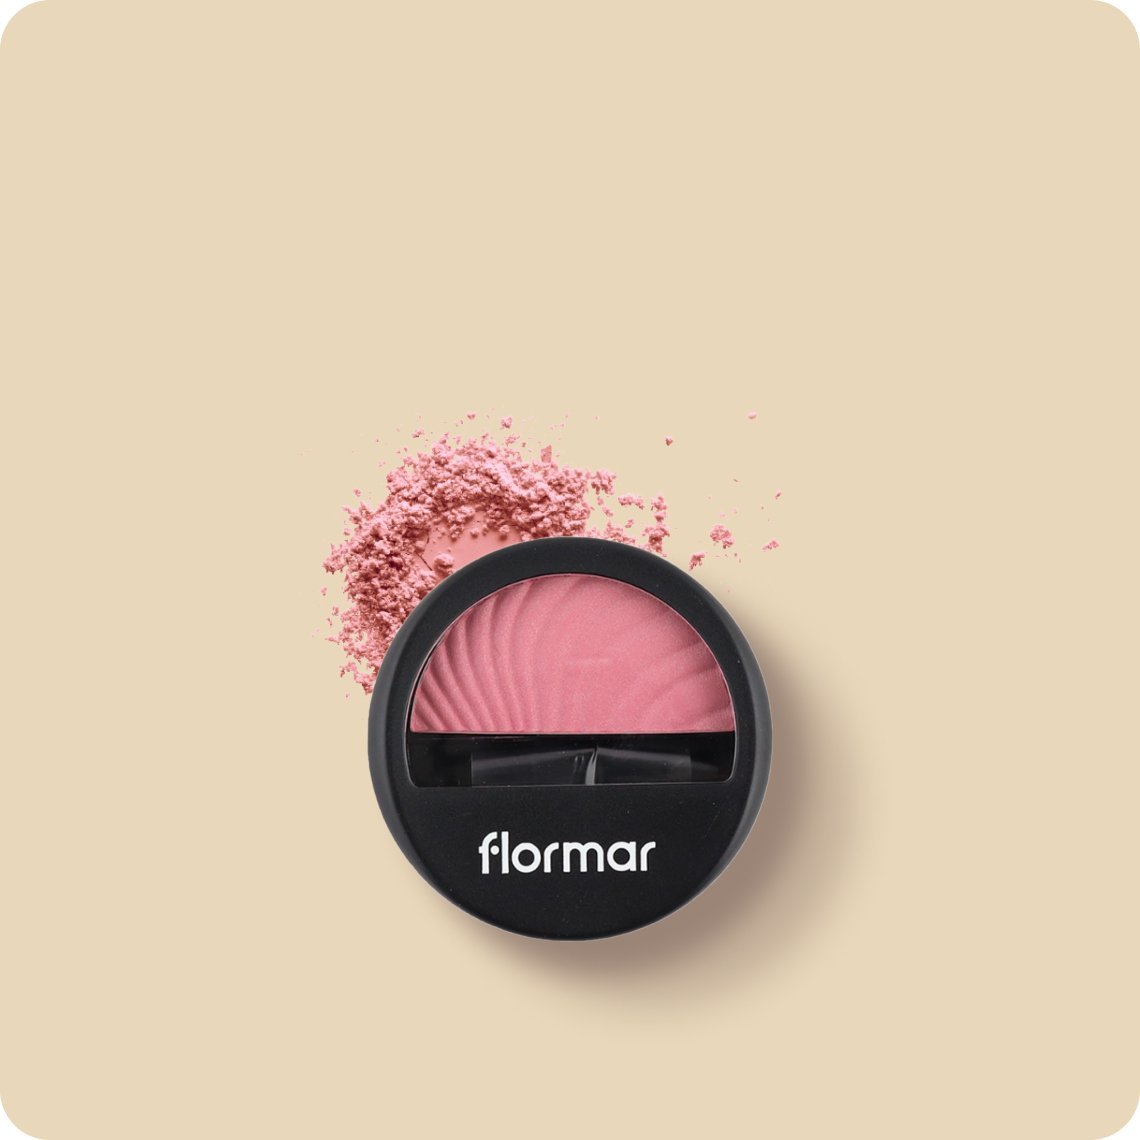 Flormar Malta - From brushes to blush and everything in